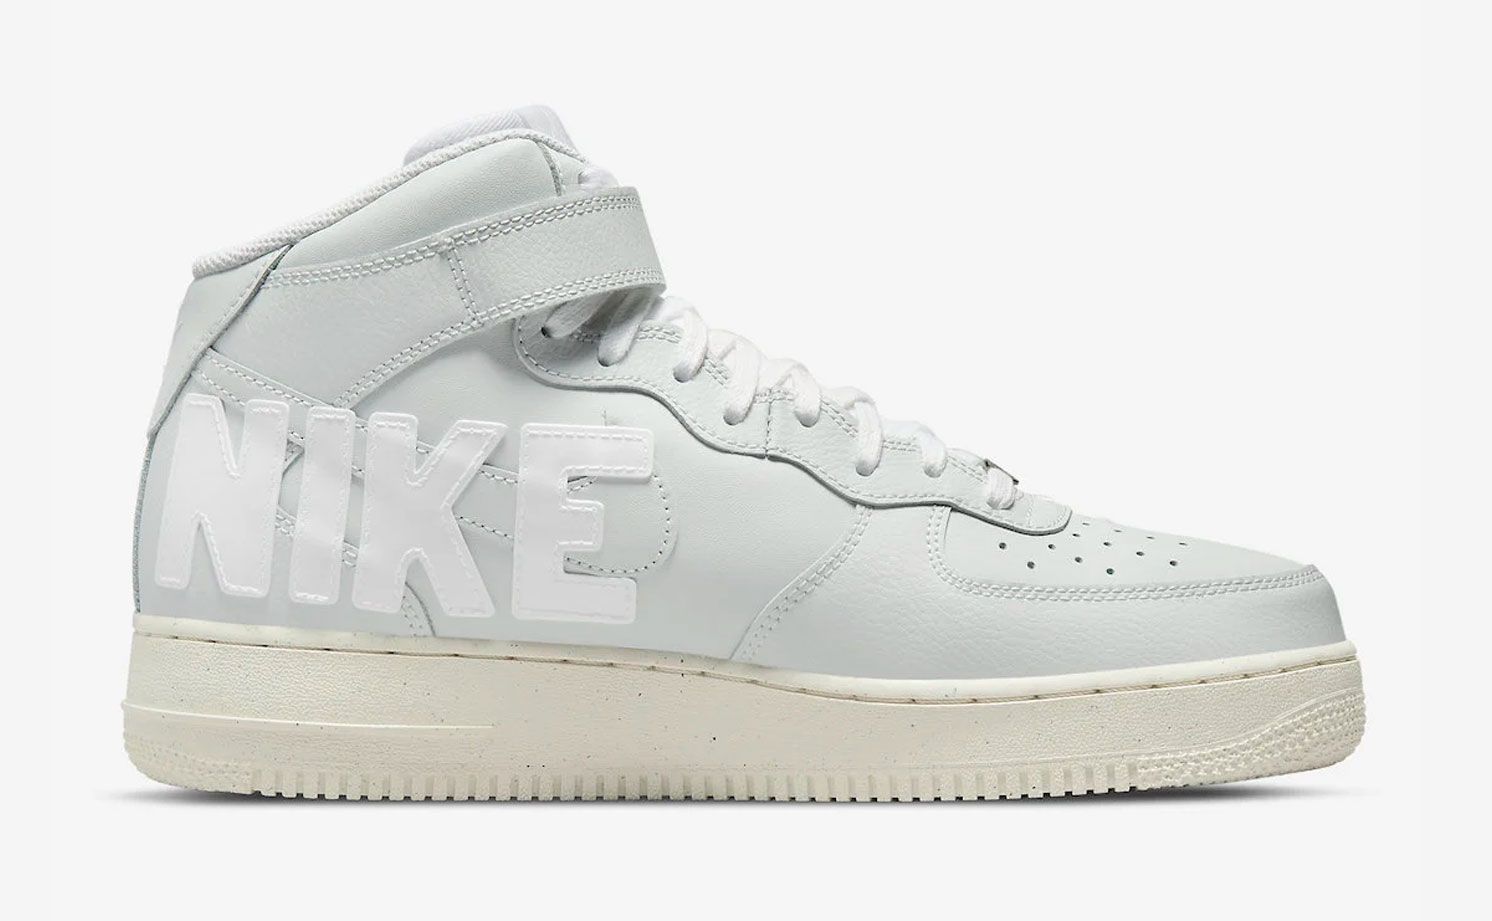 Nike Air Force 1 Mid "Copy Paste" product image of a grey mid-top with white Nike overlays and an off-white midsole.